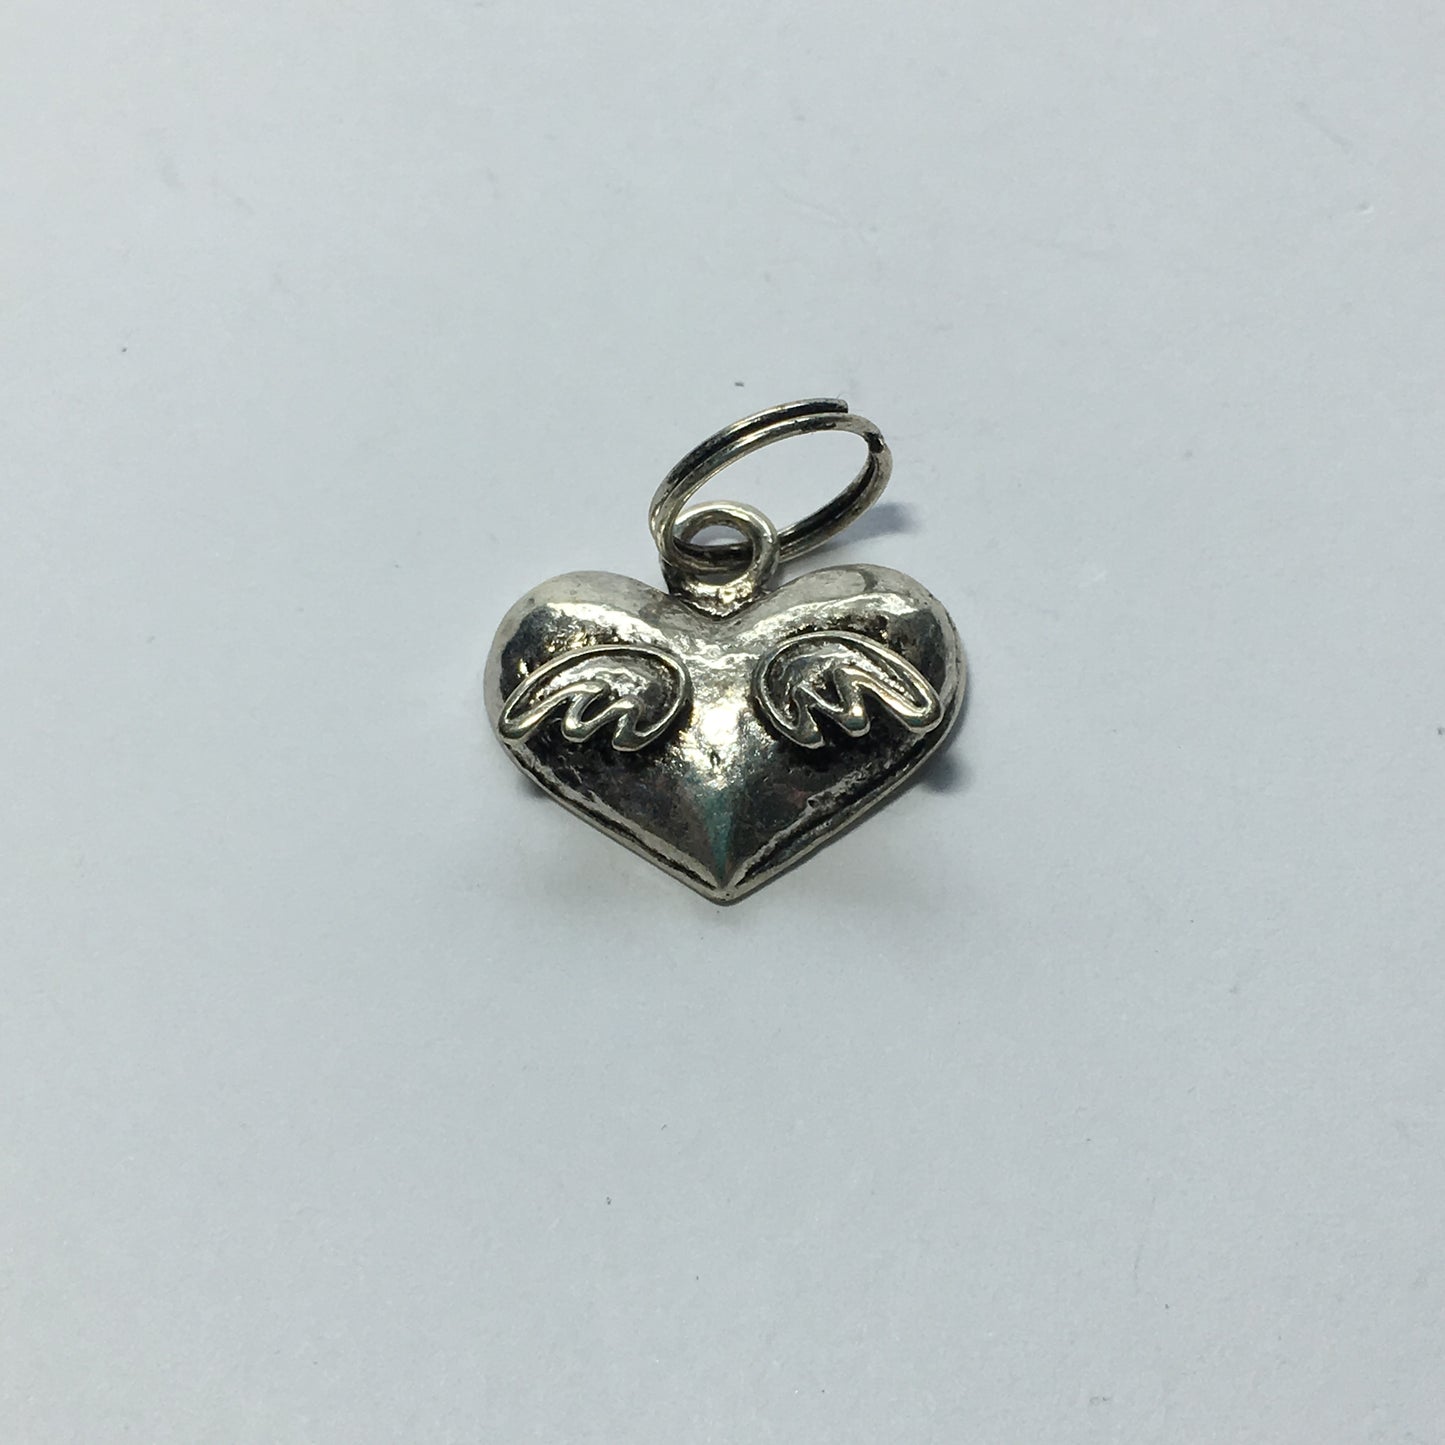 Antique Silver Heart with Wings Charm, 18 x 15 mm